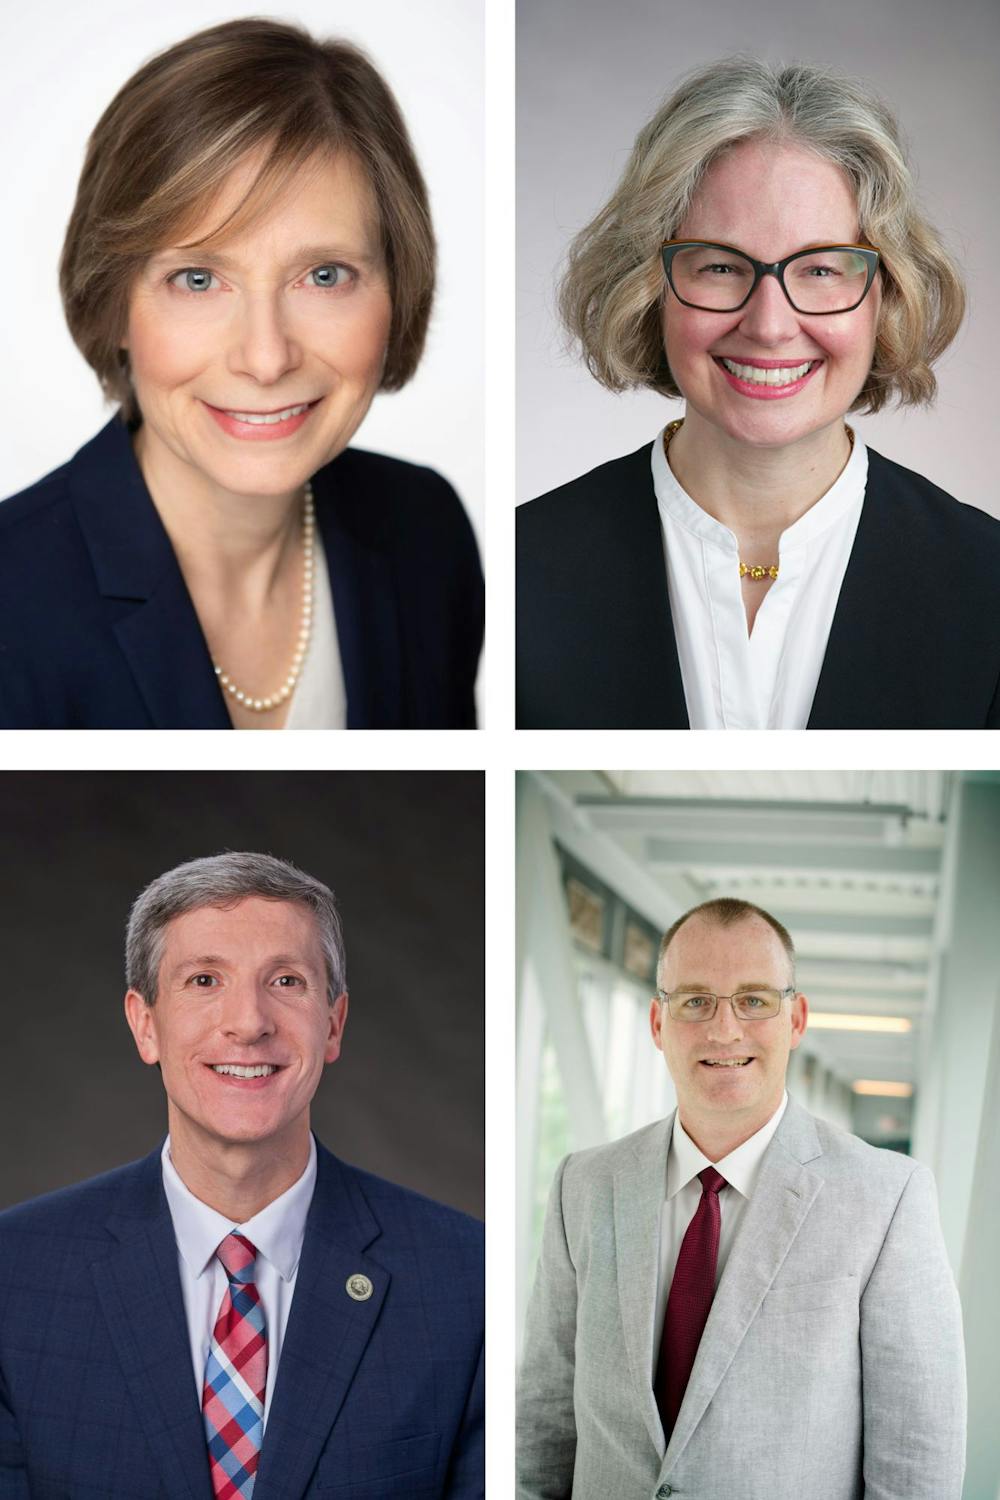 The candidates for the new dean of CAS are Renée Baernstein (top left), Melissa Gregory (top right), Matthew Smith (bottom left) and David Hemmer (bottom right).